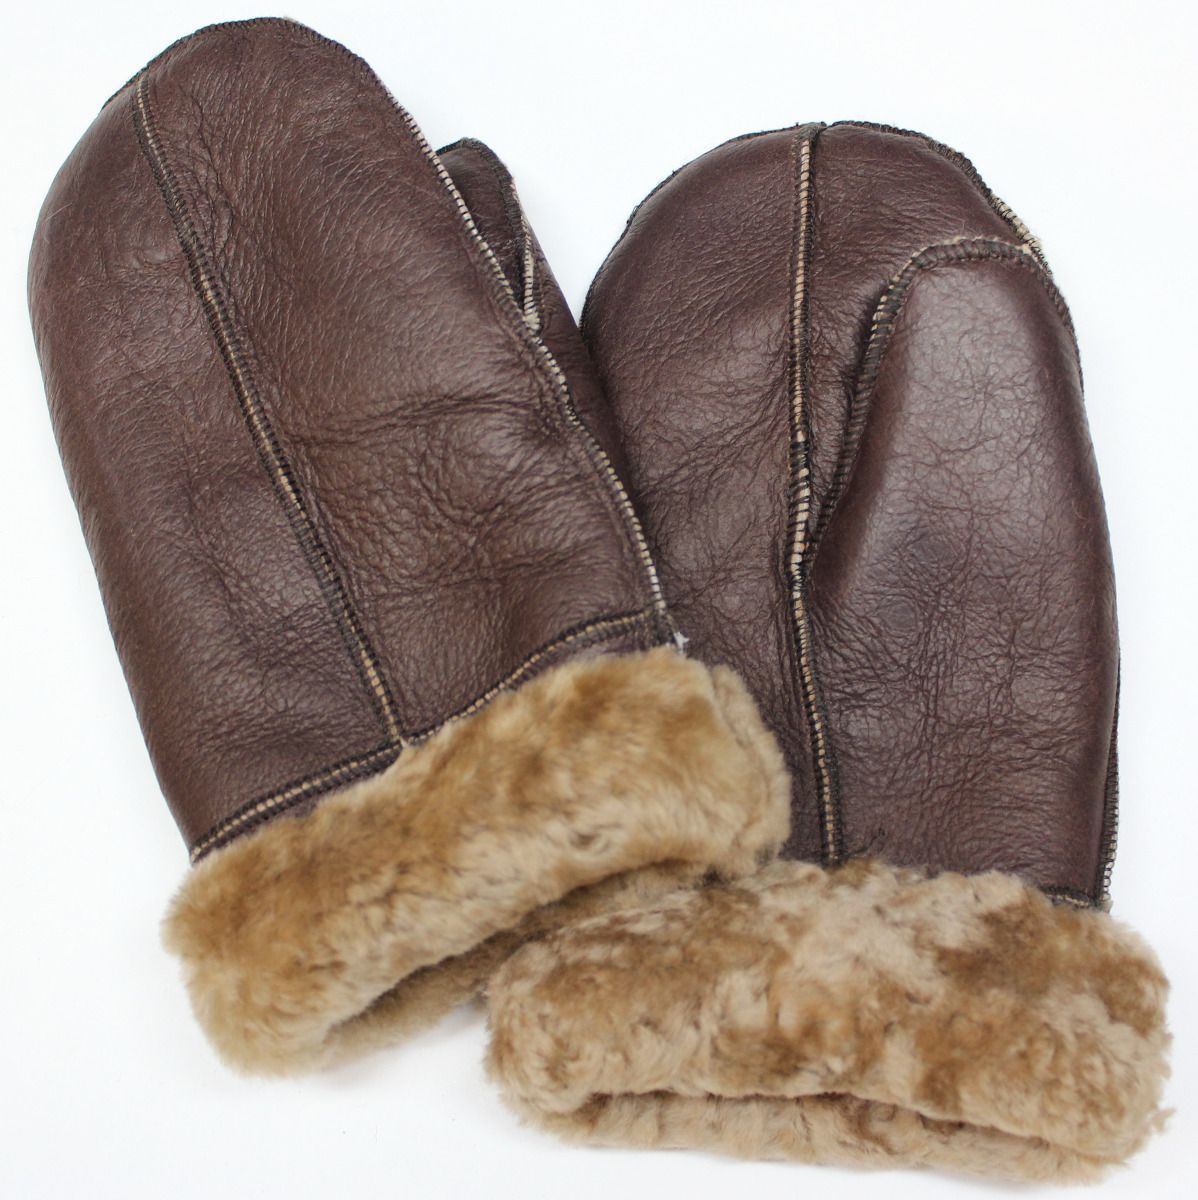 Handmade new real Leather sheepskin unisex sheepskin shearling mittens mitts gloves thick warm